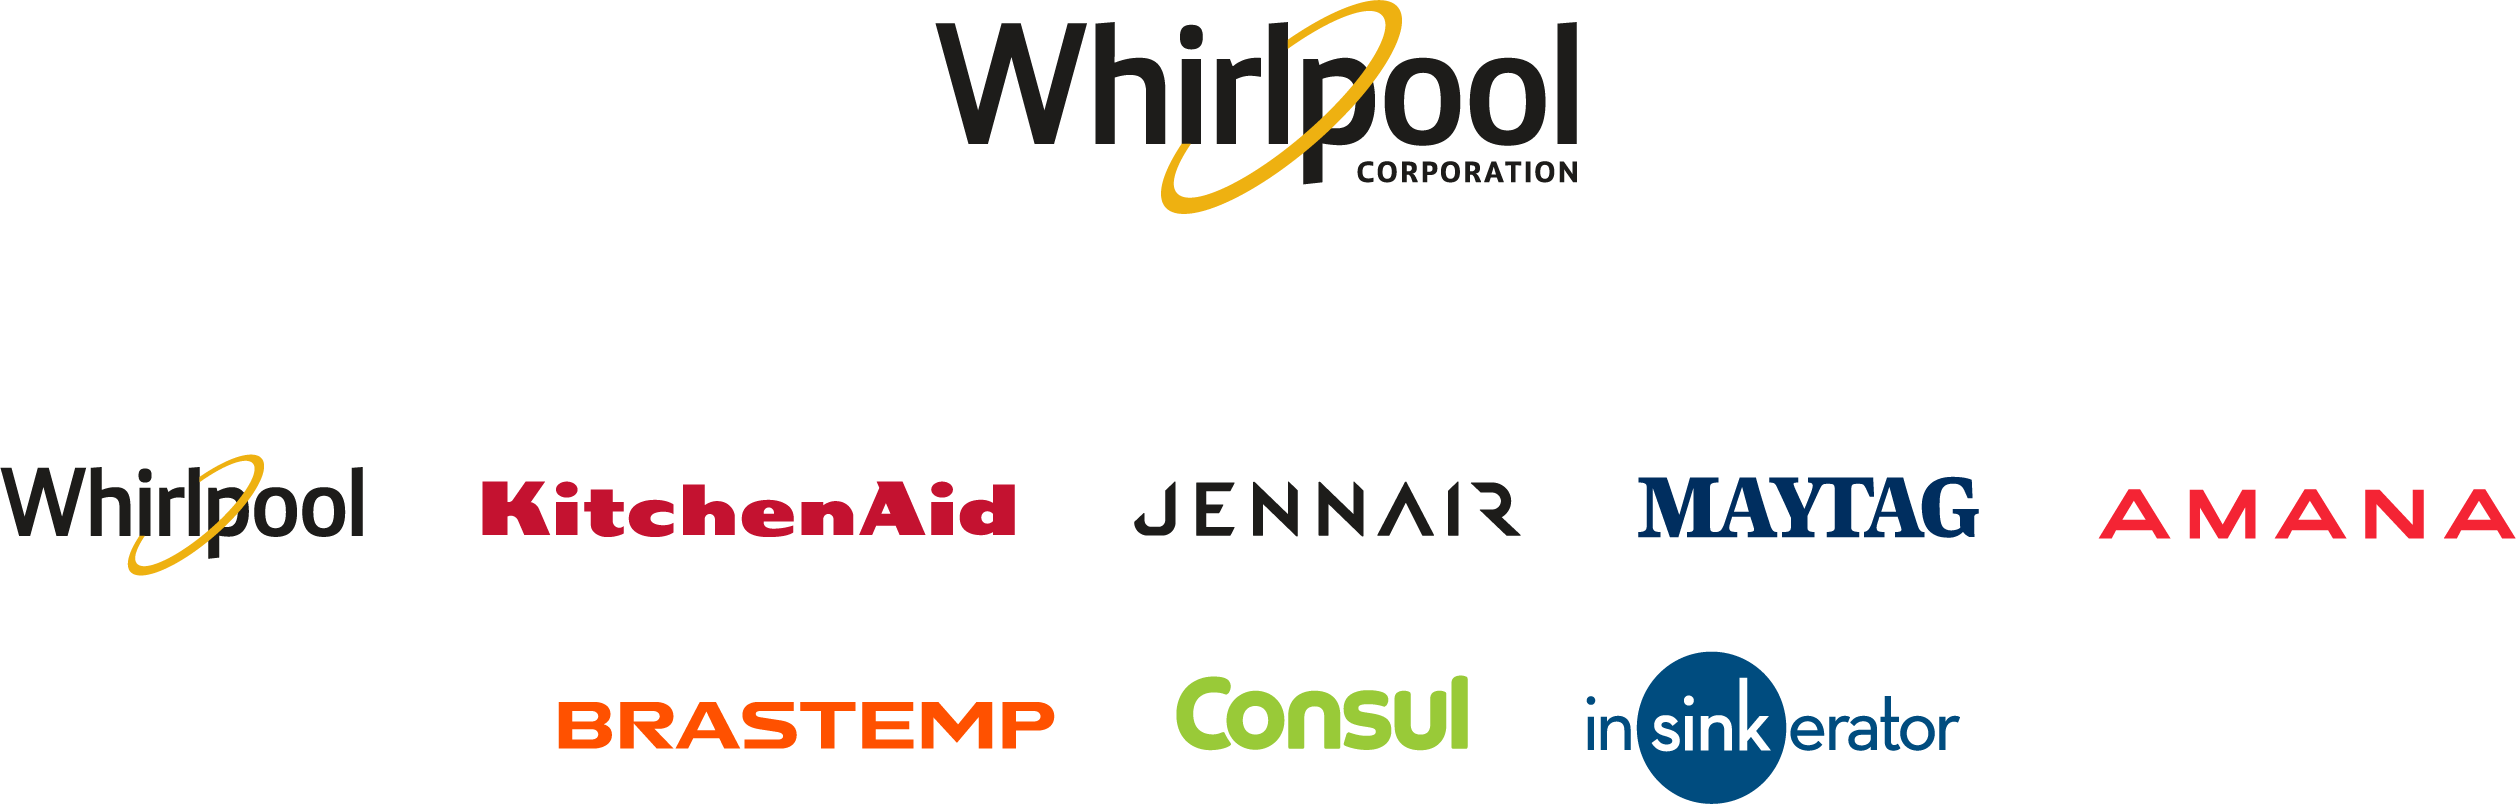 Whirlpool Corporation logo and lockup with company owned brand logos